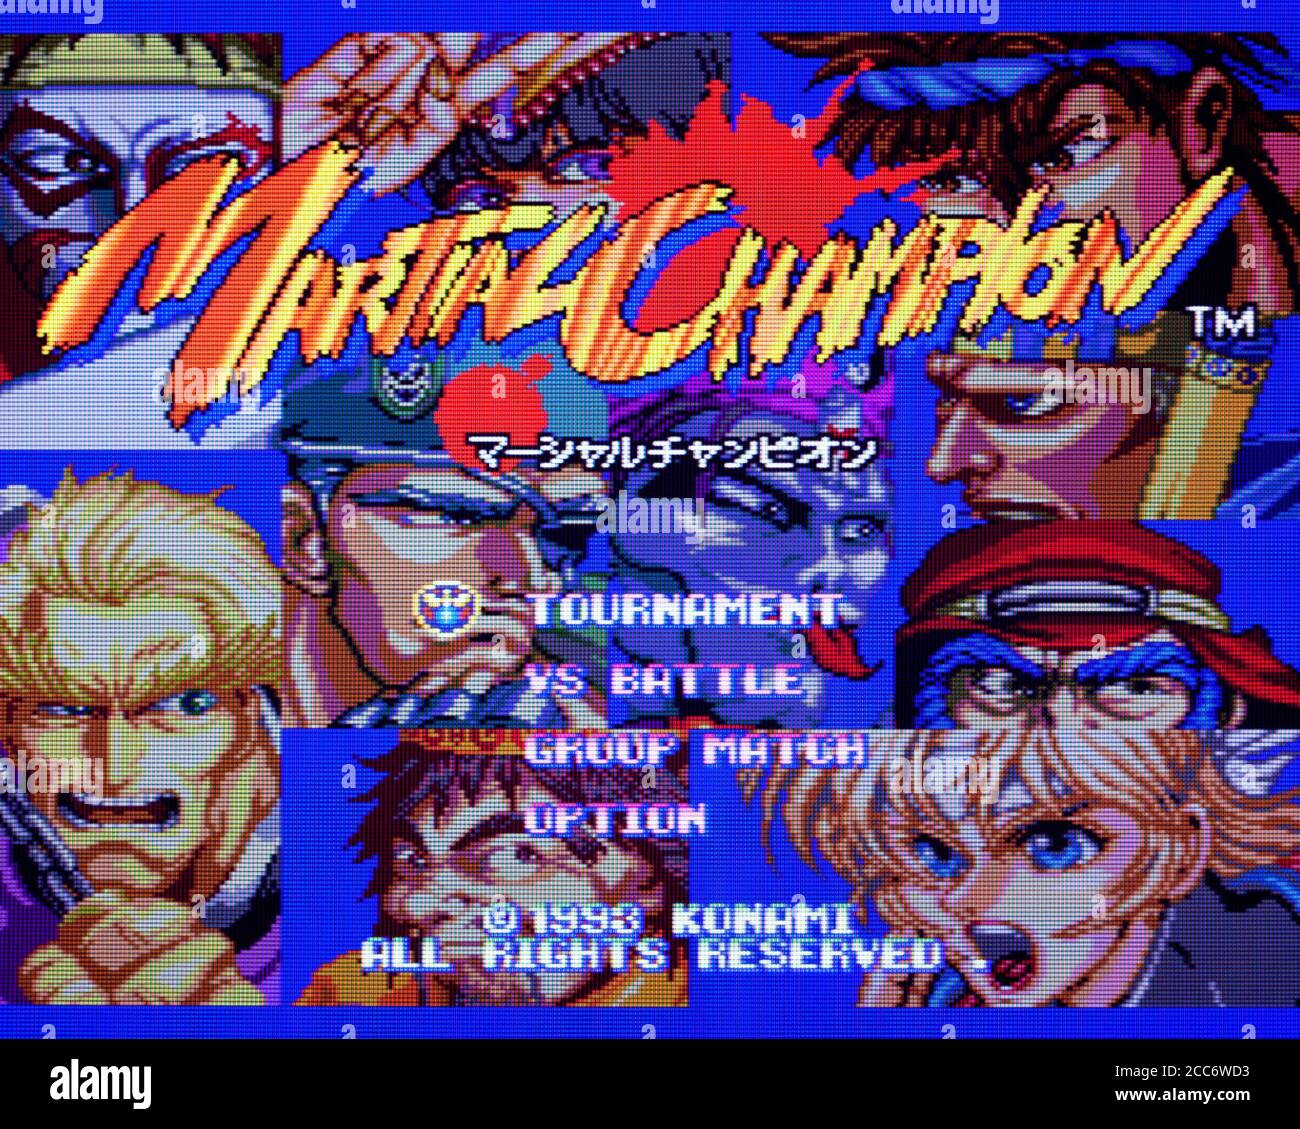 Martial Champion - PC Engine CD Videogame - Editorial use only Stock Photo